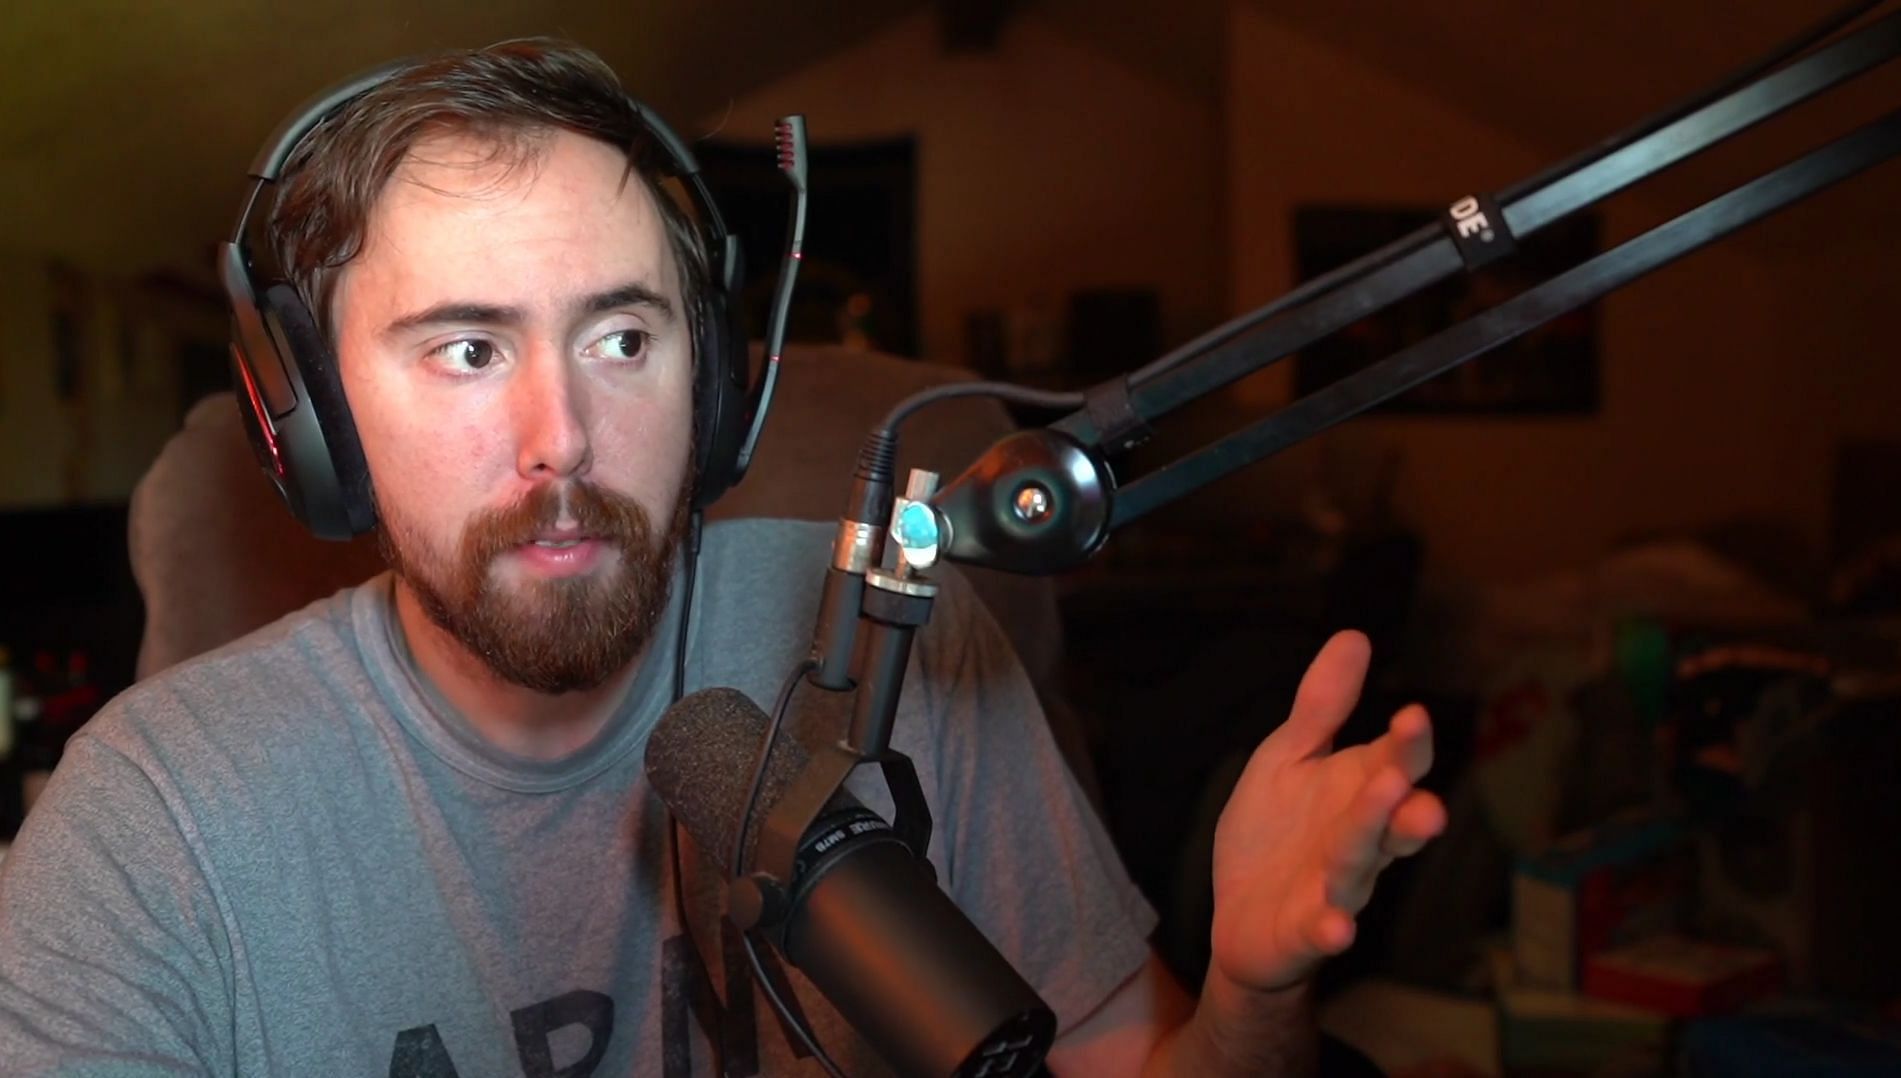 Asmongold came out of nowhere and returned to his original channel, to a massive stream (Image via Twitch)